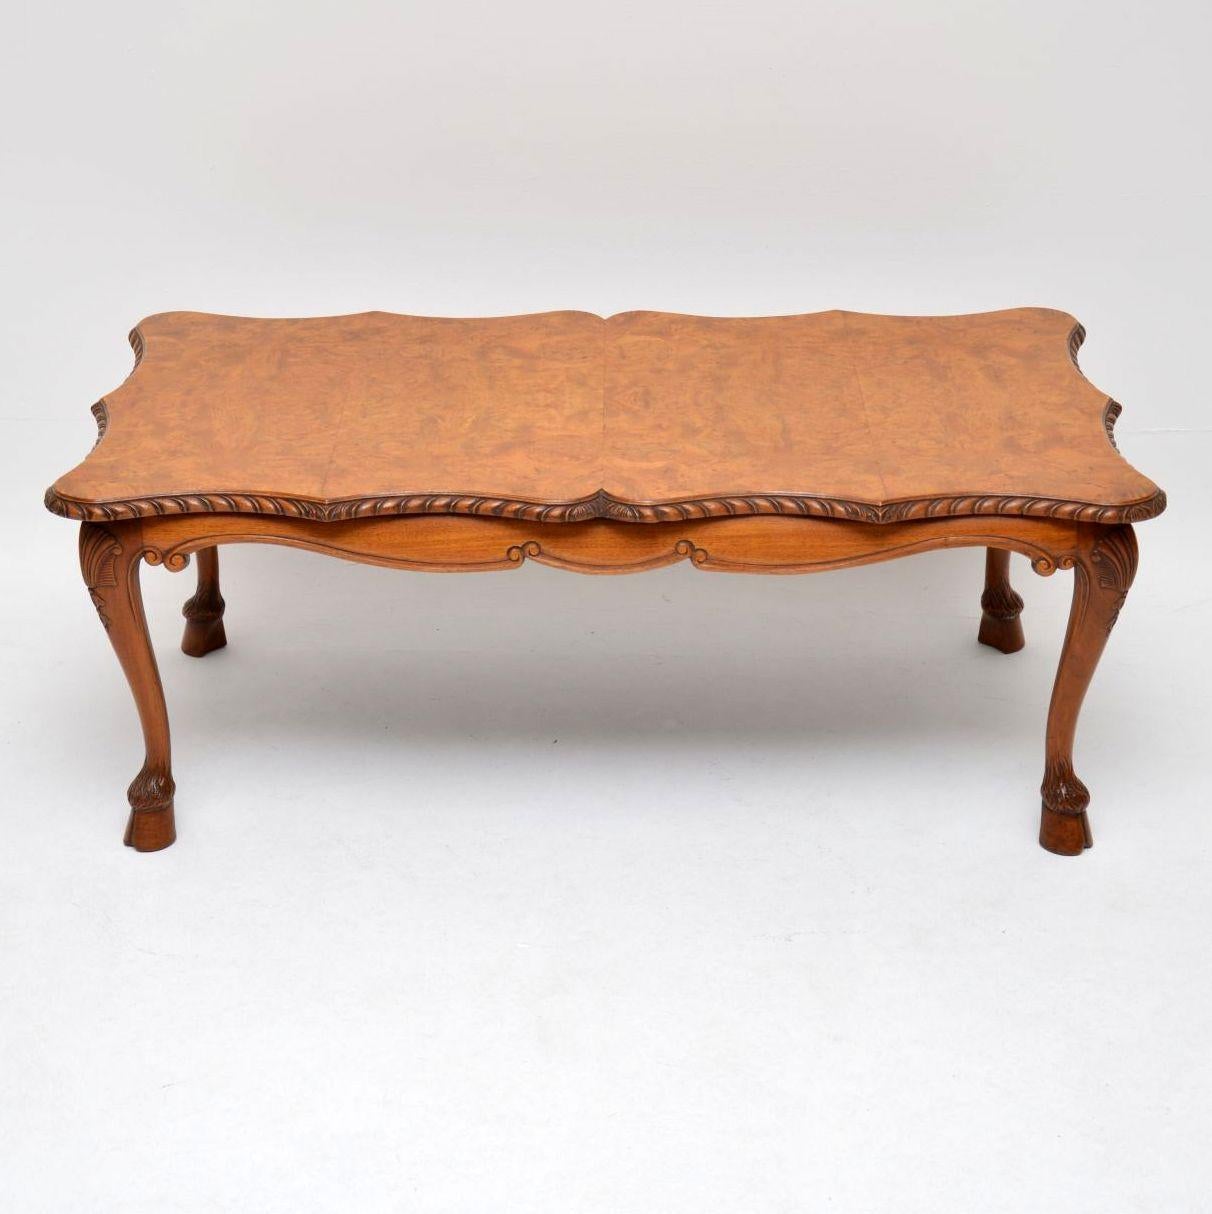 This antique walnut coffee table has a lovely mellow color and some exquisite features. It dates to circa 1920s-1930s period and is in excellent condition, having just been polished. The shaped top has a carved gadrooned edge, while the solid walnut